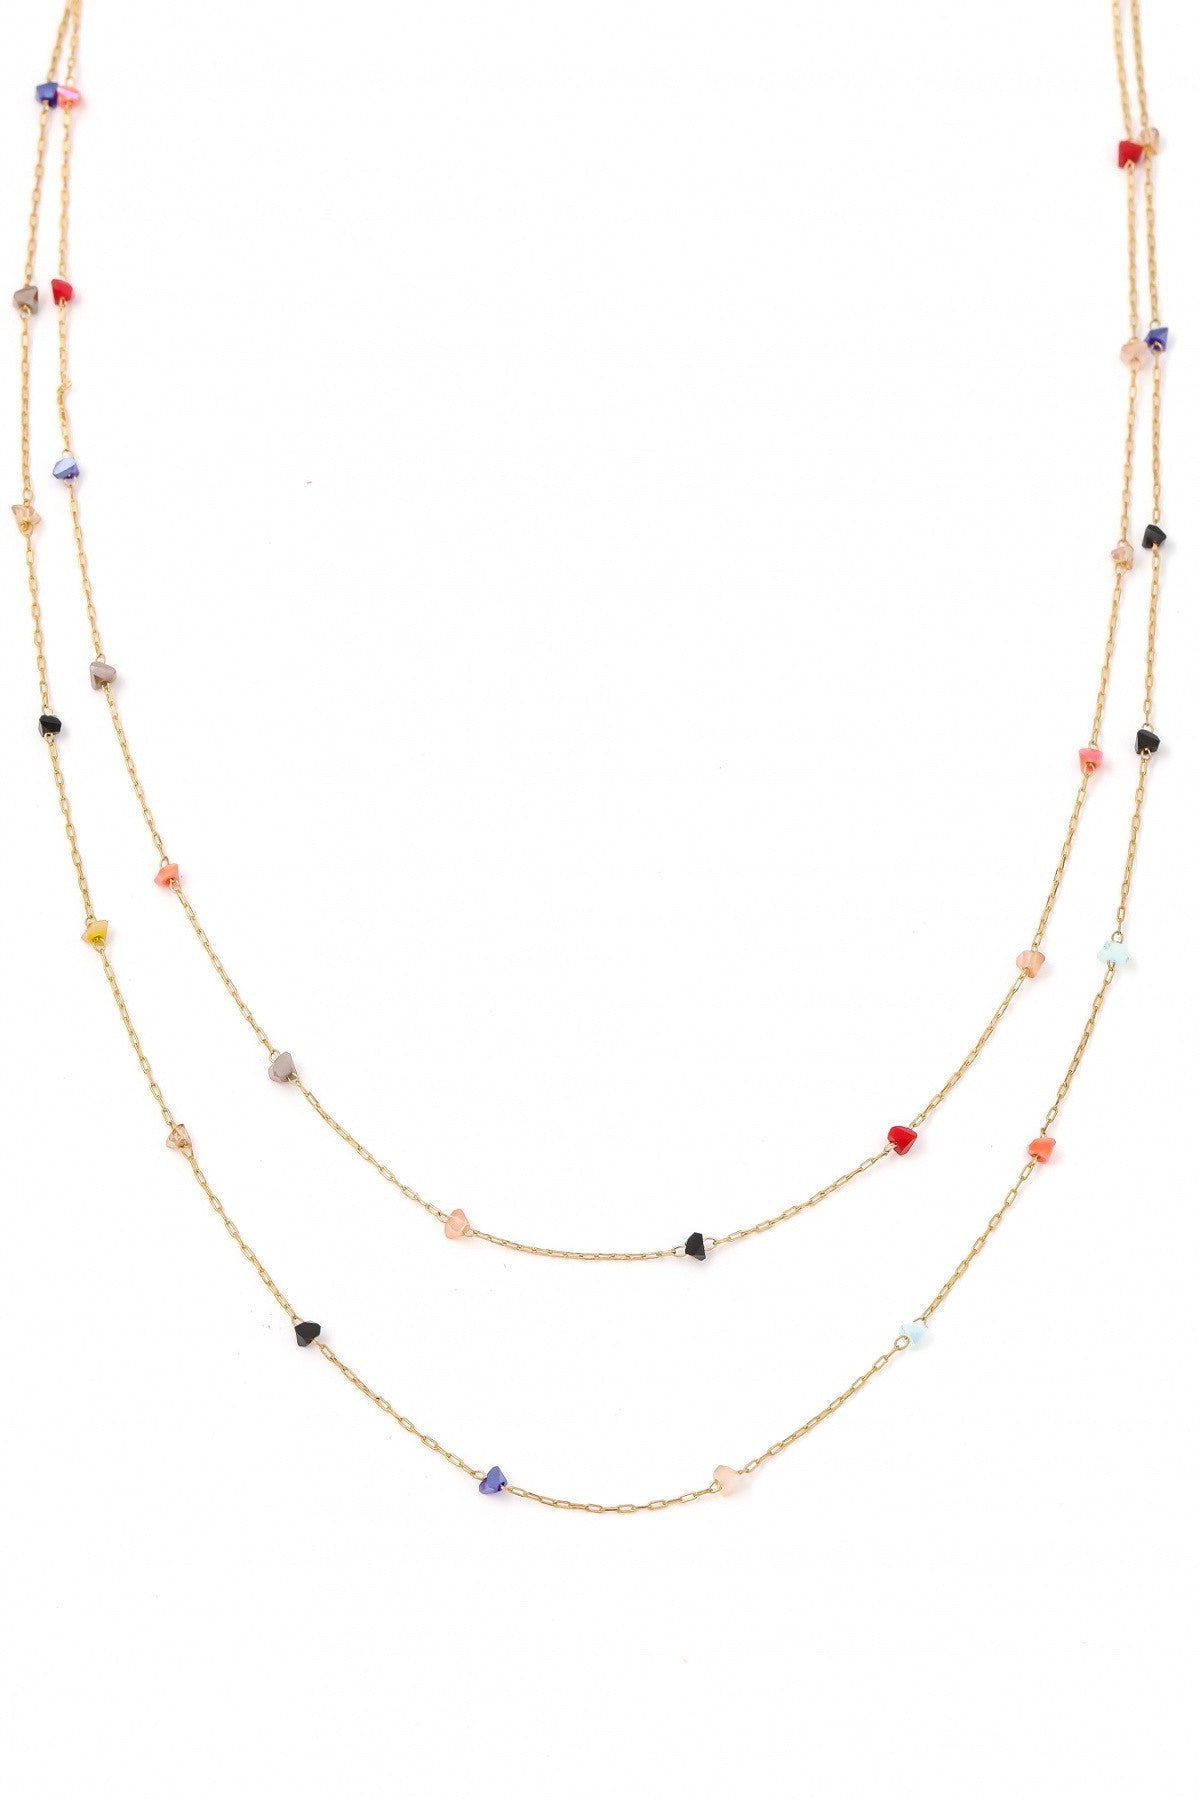 FMN114 Double Layer Glass Bead Necklace Multi